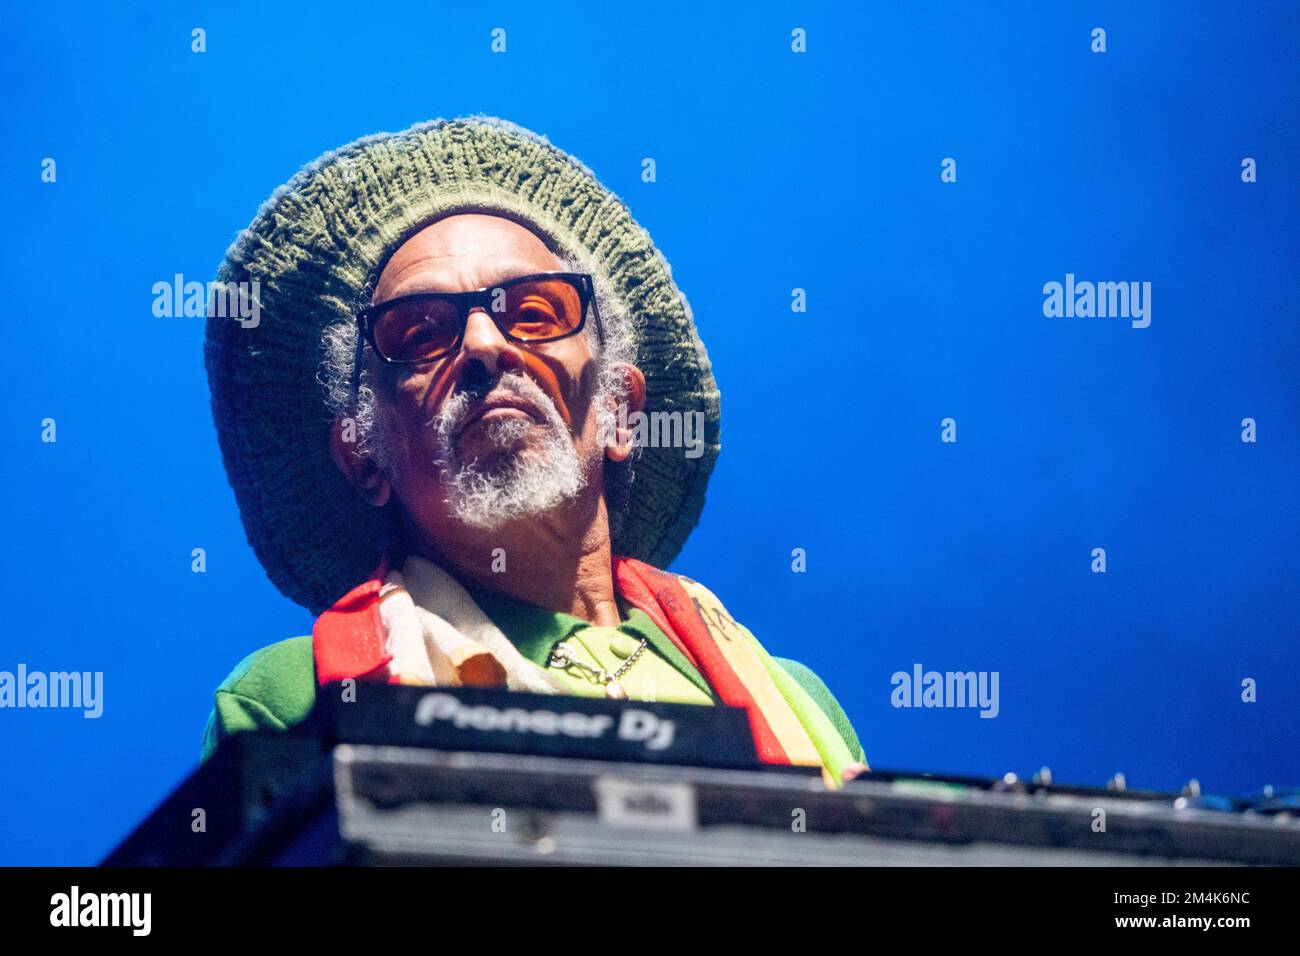 London, UK. Wednesday, 21 December, 2022. Don Letts DJing before a performance by UB40 at the OVO Wembley Arena in London. Photo: Richard Gray/Alamy Live News Stock Photo